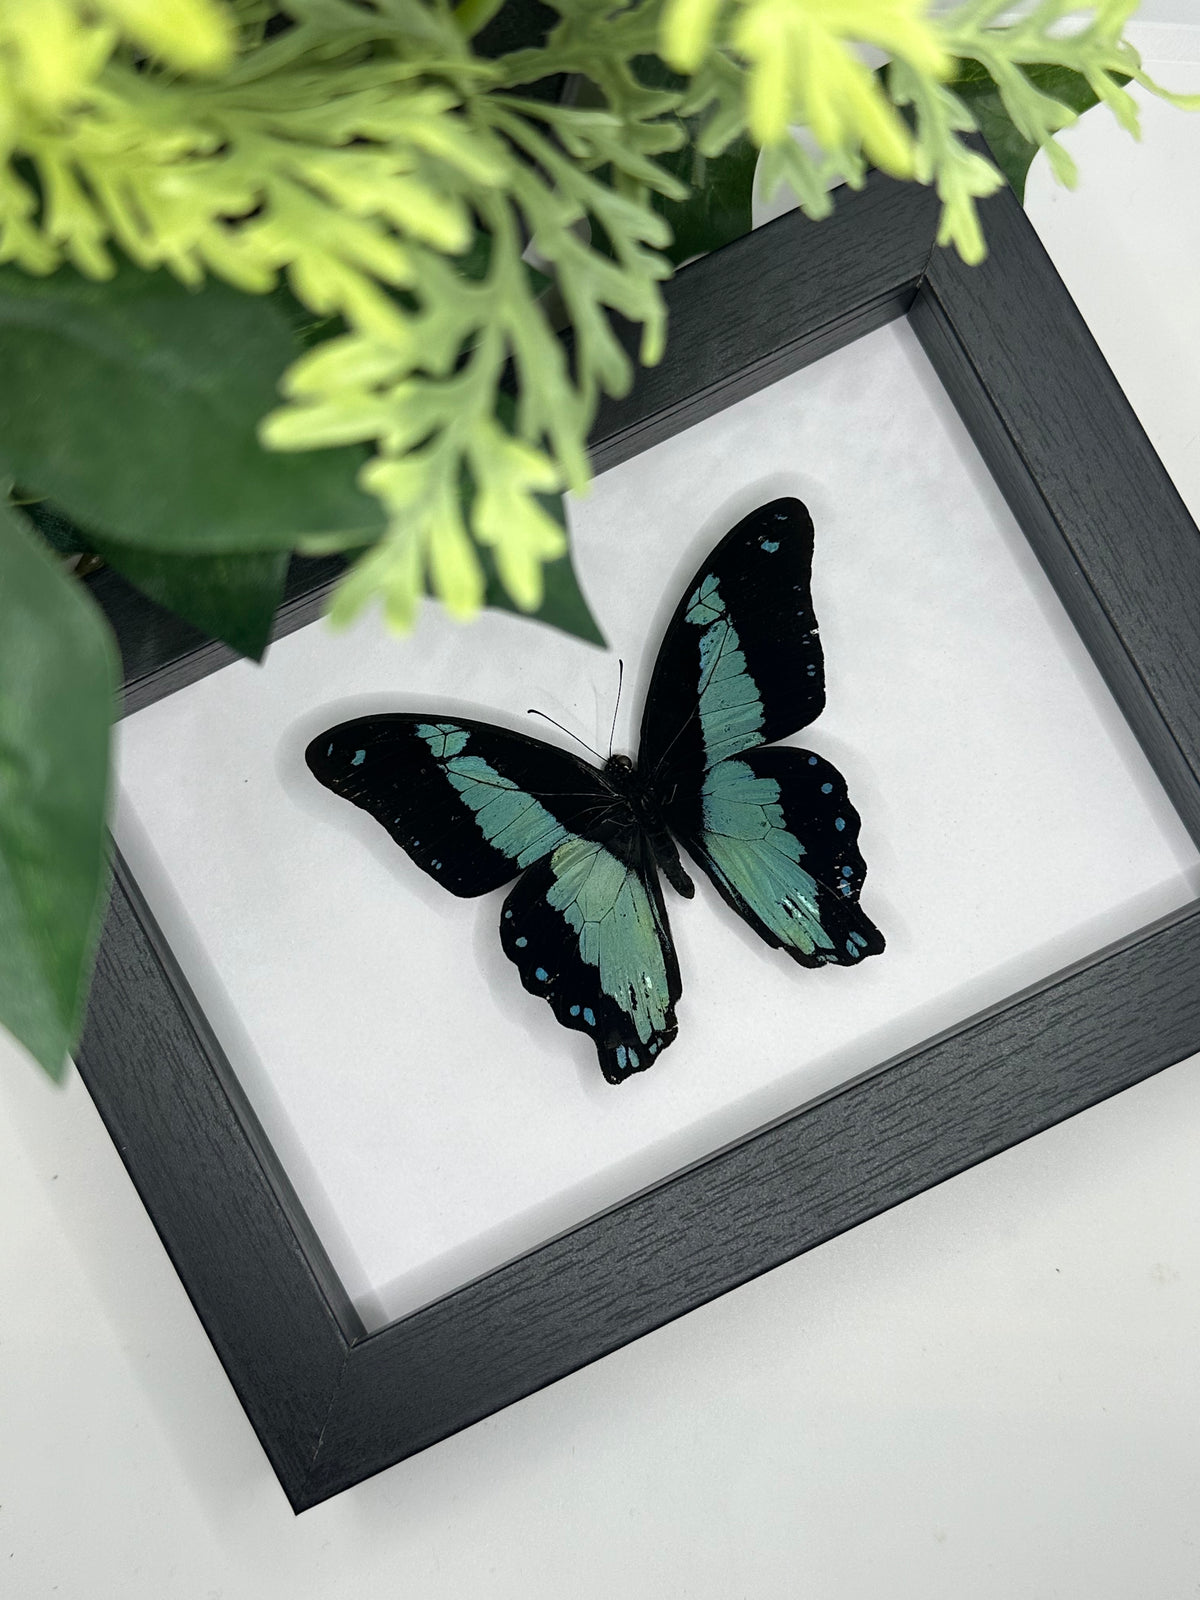 Broad-Green Banded Swallowtail / Papilio Bromius in a frame